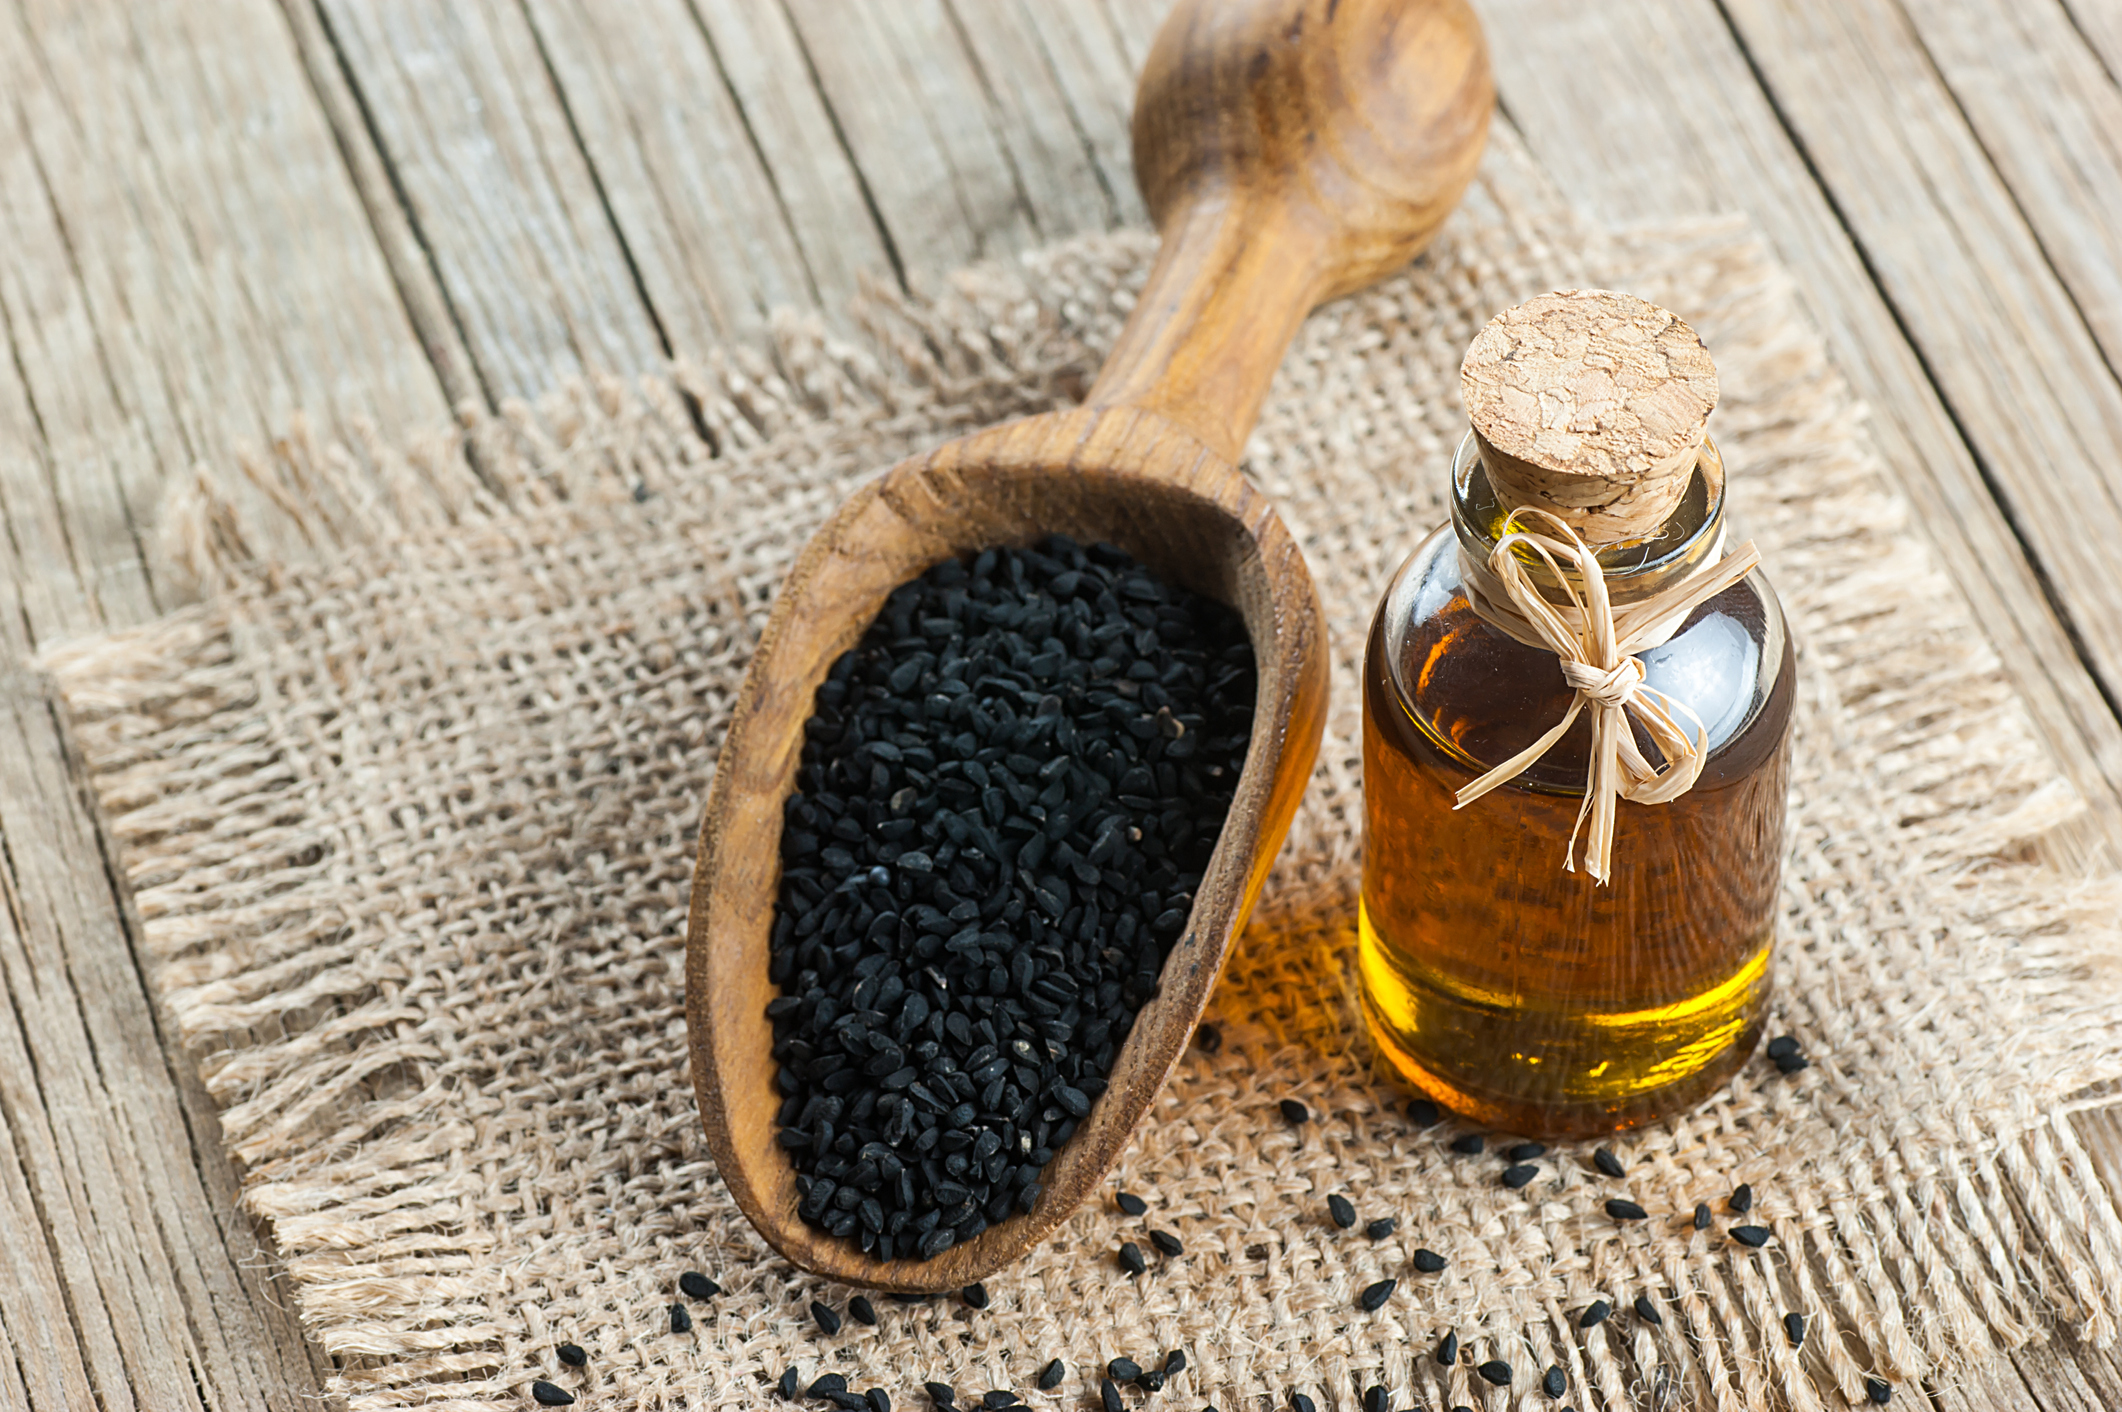 Prevention or prescription: Black cumin seed and diabetes